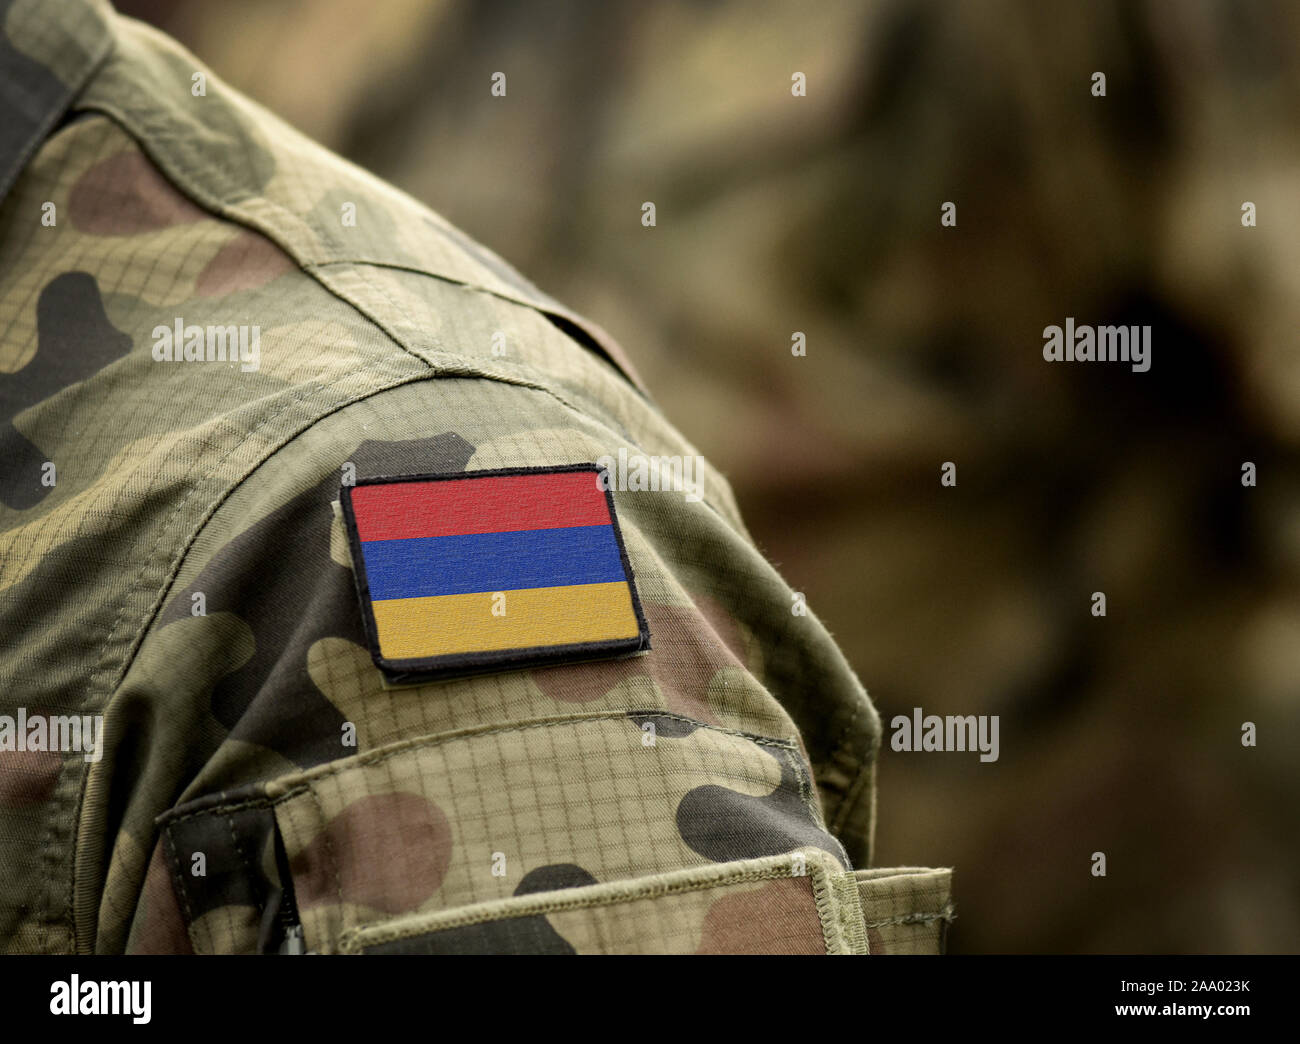 Flag of Armenia on military uniform. Army, armed forces, soldiers. Collage. Stock Photo